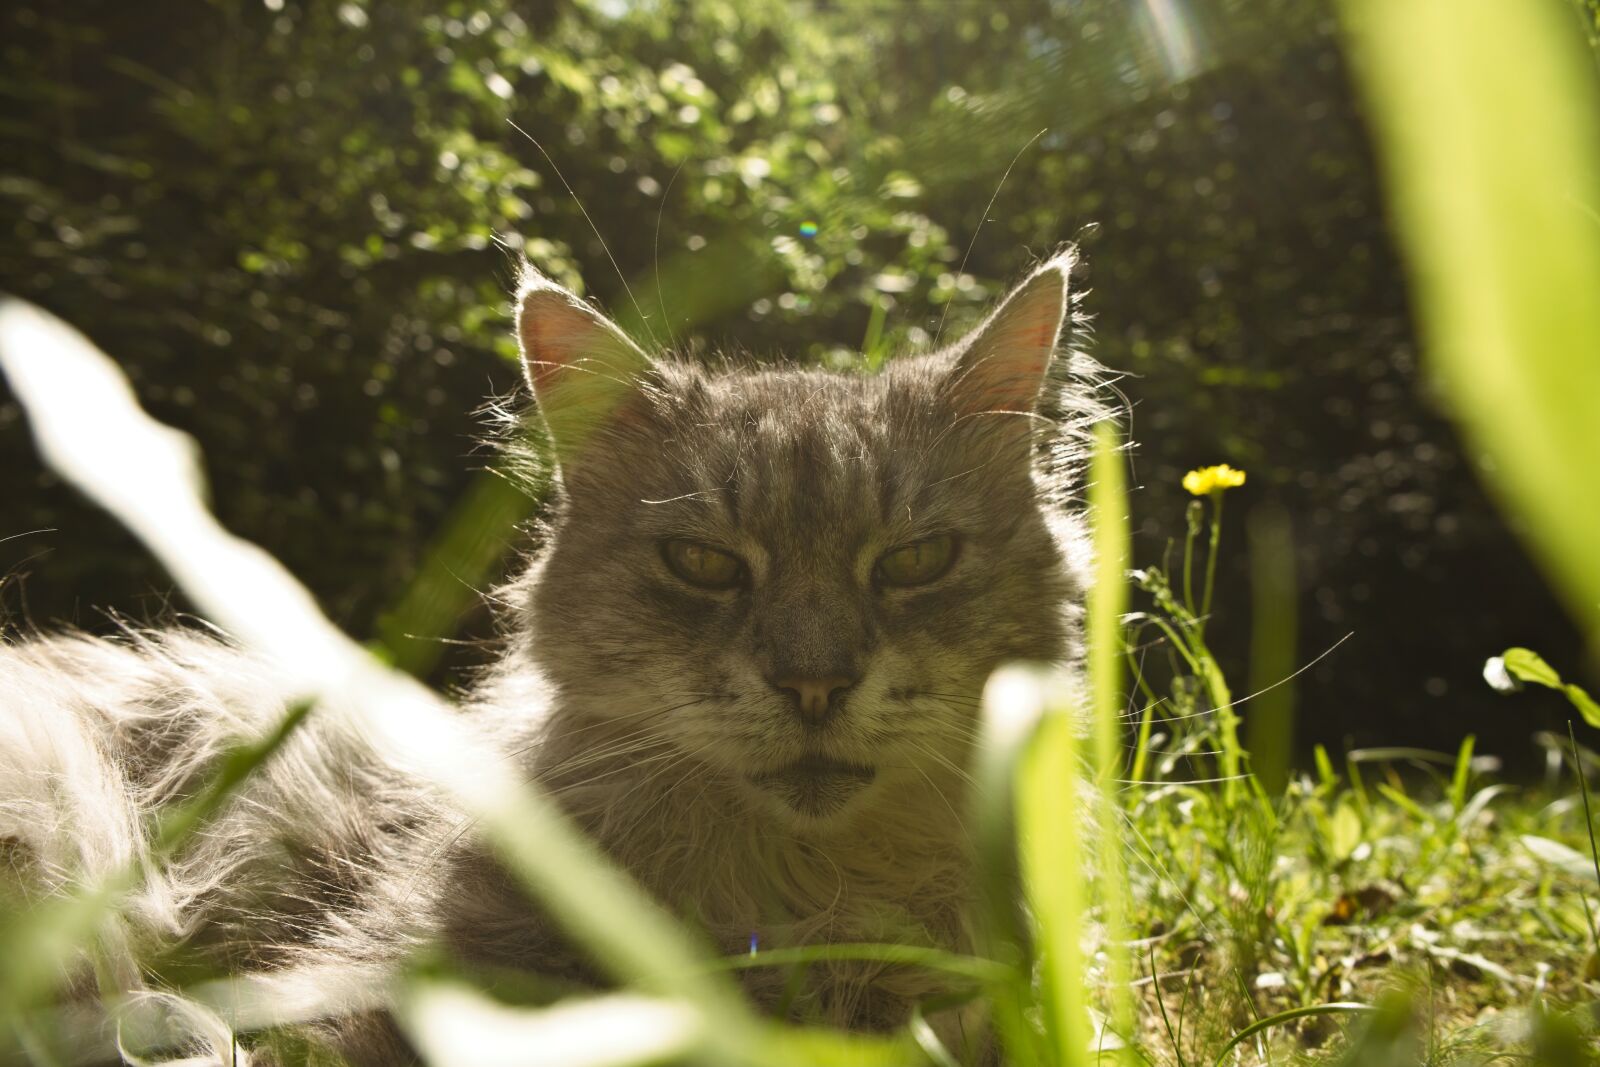 Sony a7 sample photo. Cat, maincoon, domestic cat photography